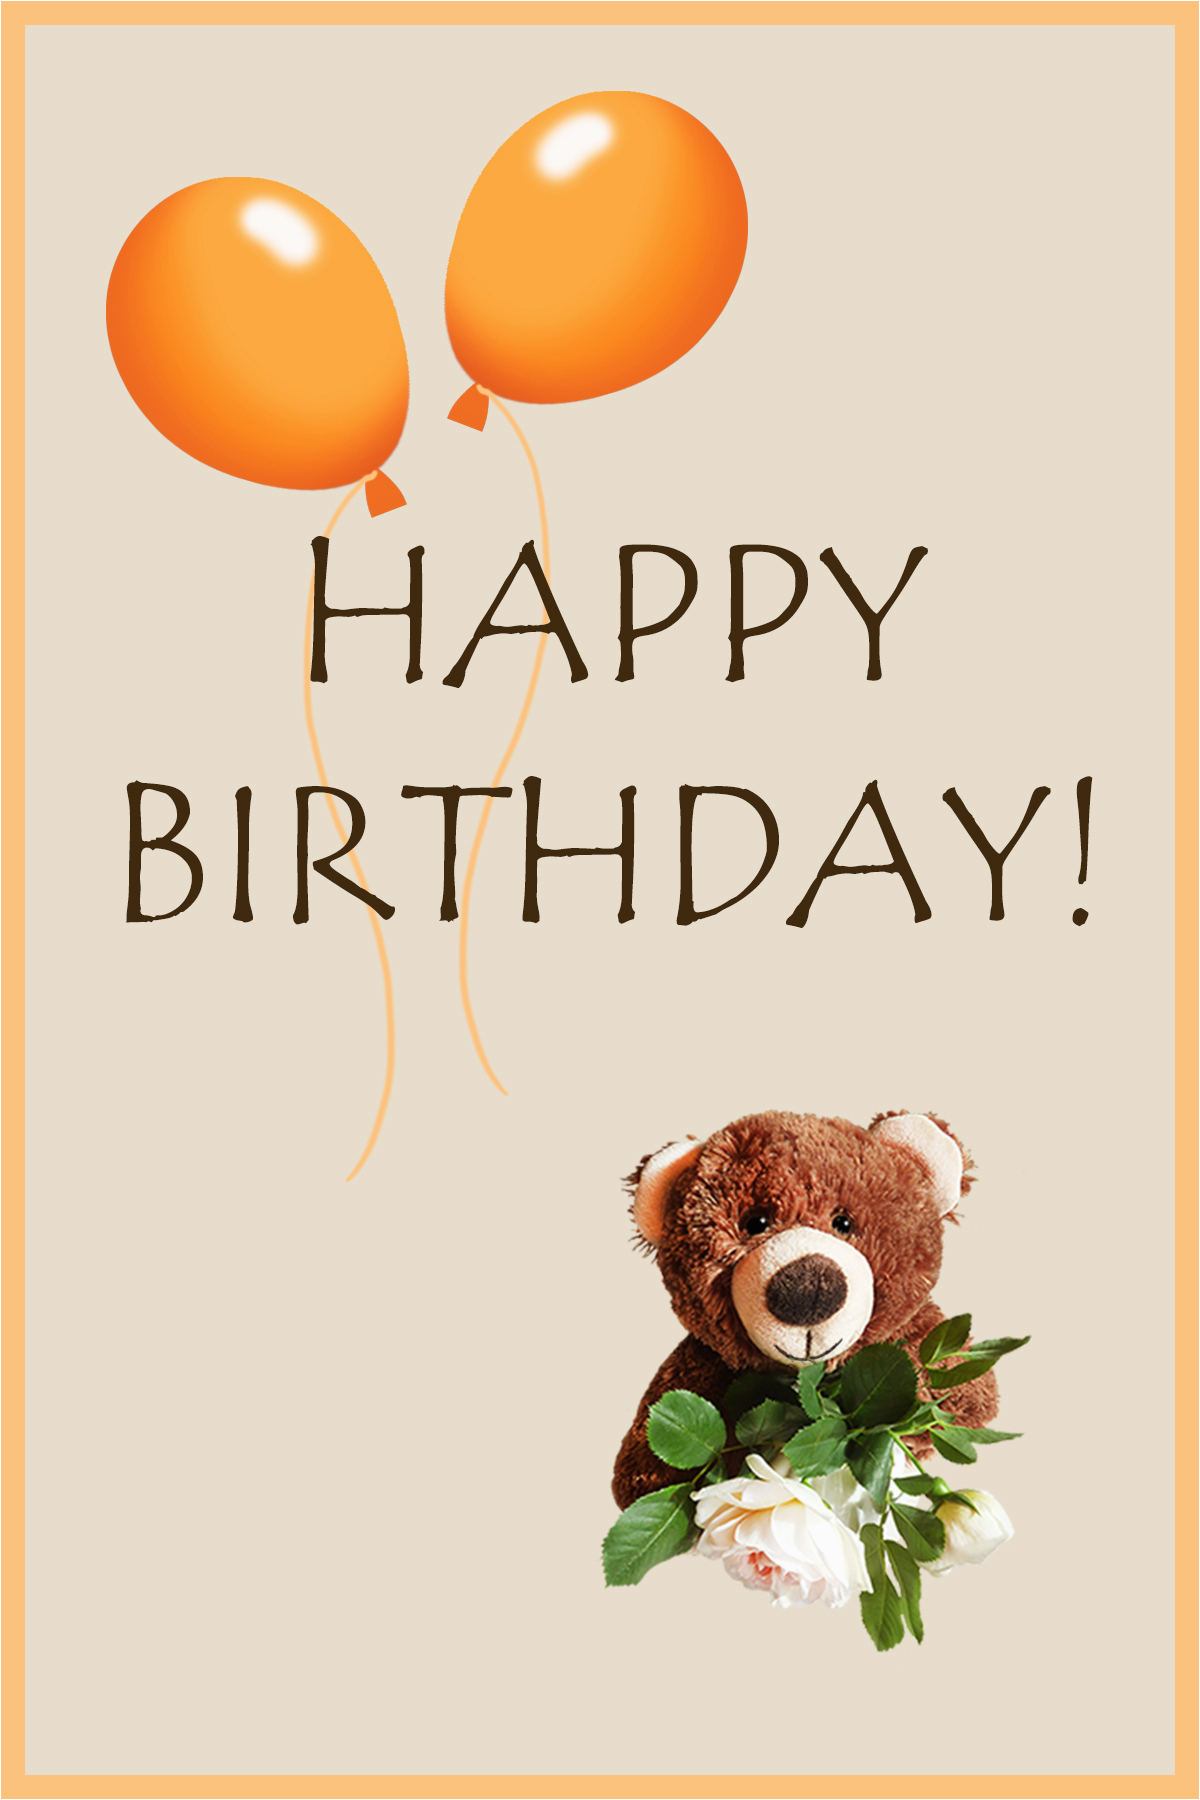 Birthday Cards with Bears Printable Happy 2nd Birthday Card Birthday Party Ideas